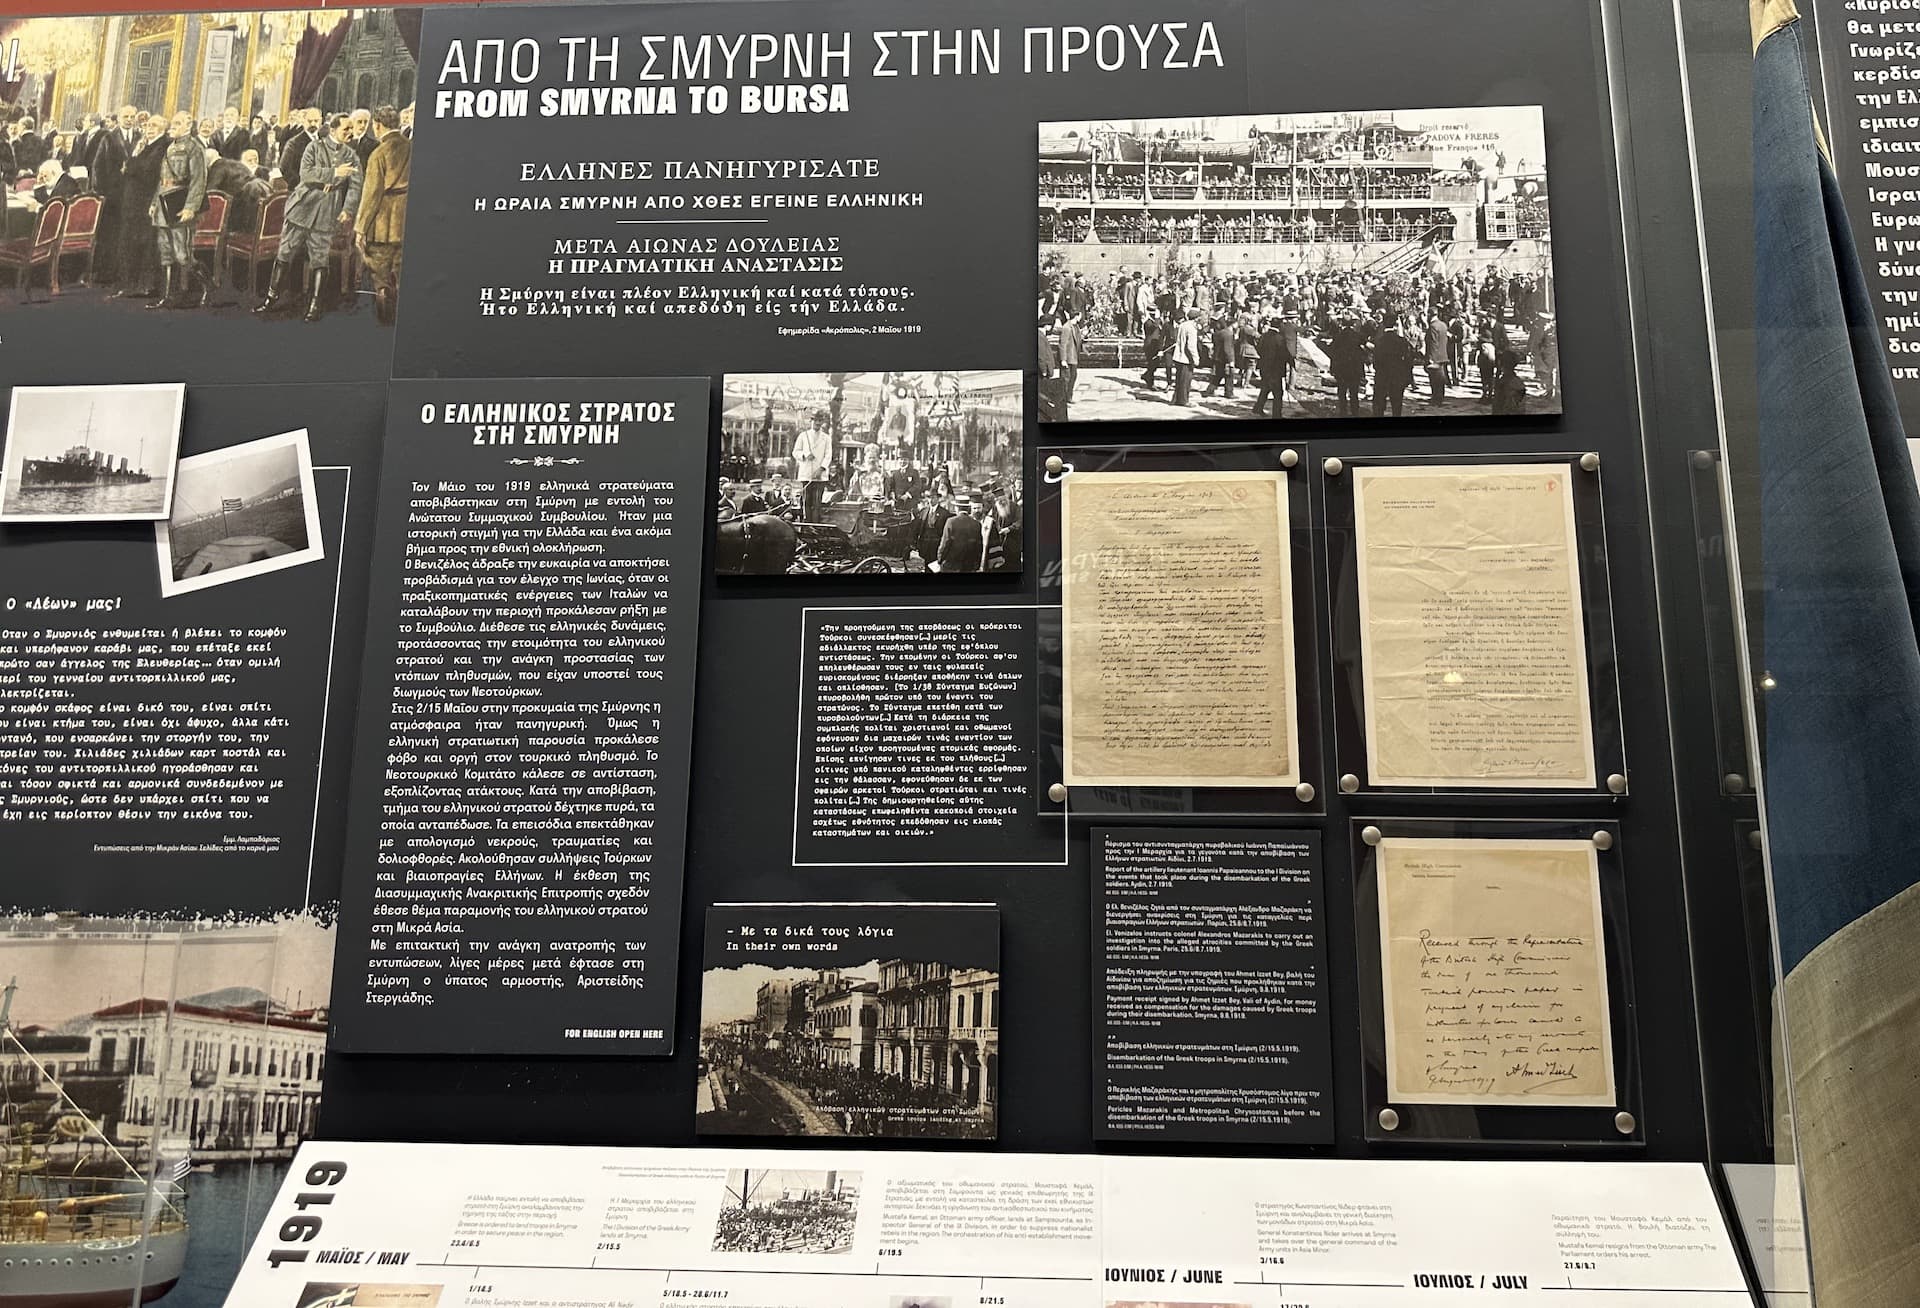 From Smyrna to Bursa in From Greater...to Contemporary Greece (Part 1)